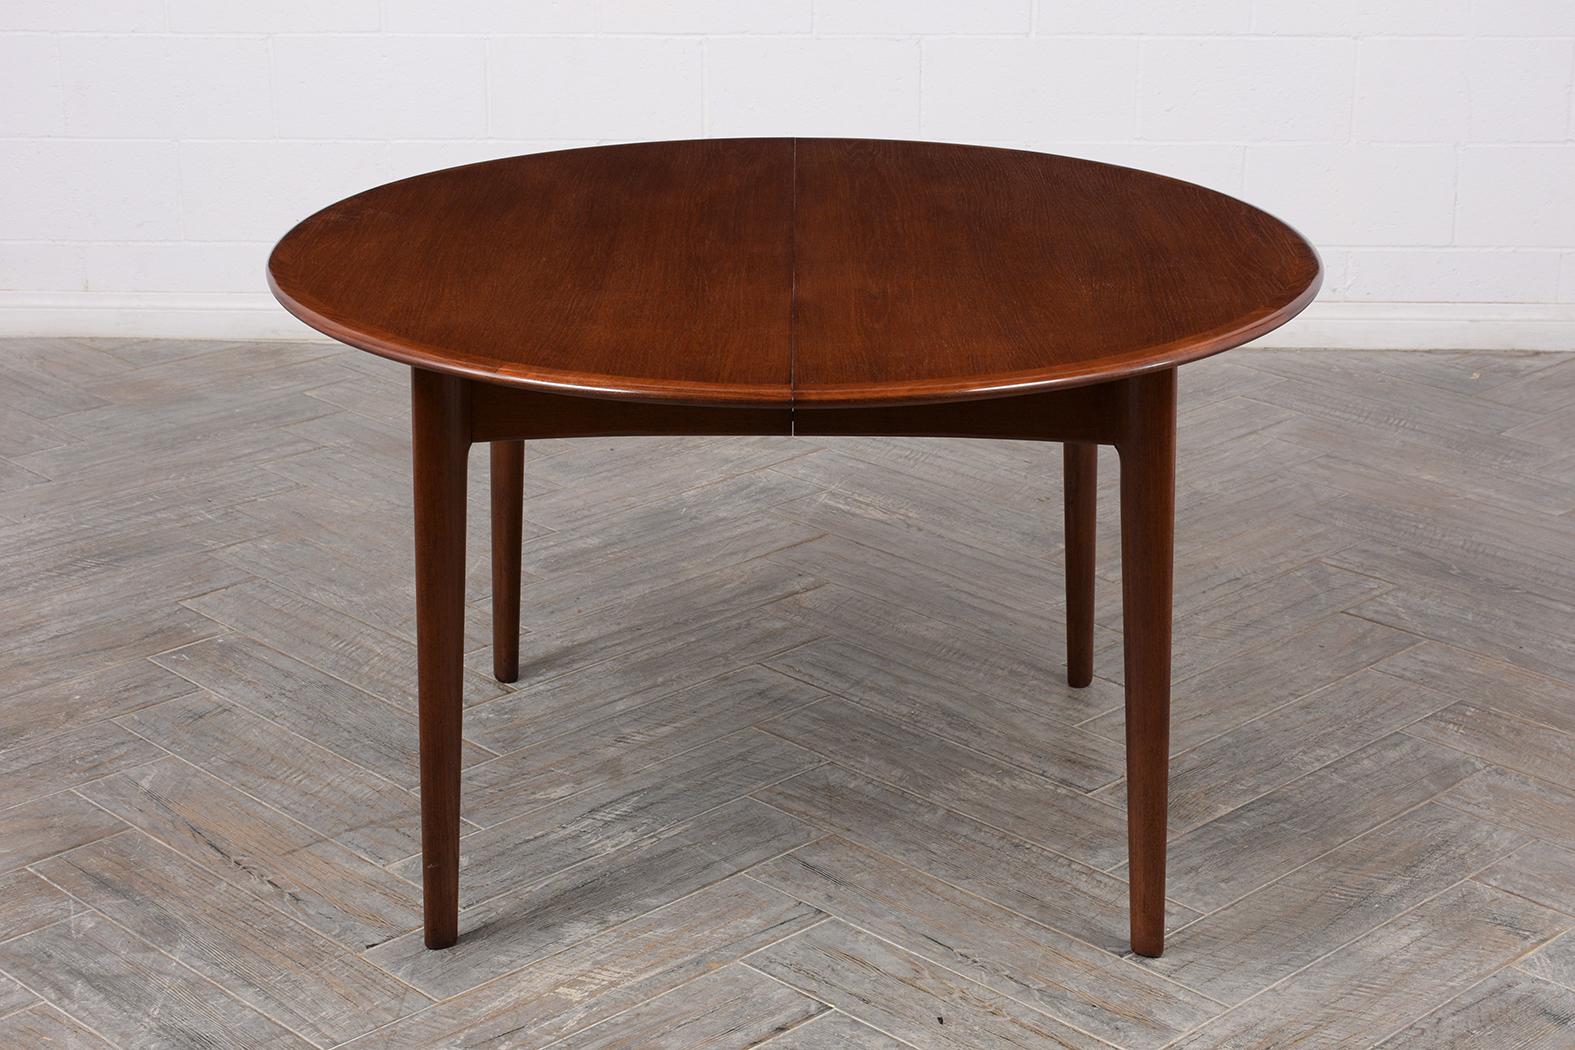 Mid-20th Century Danish Mid-Century Modern Lacquered Dining Table